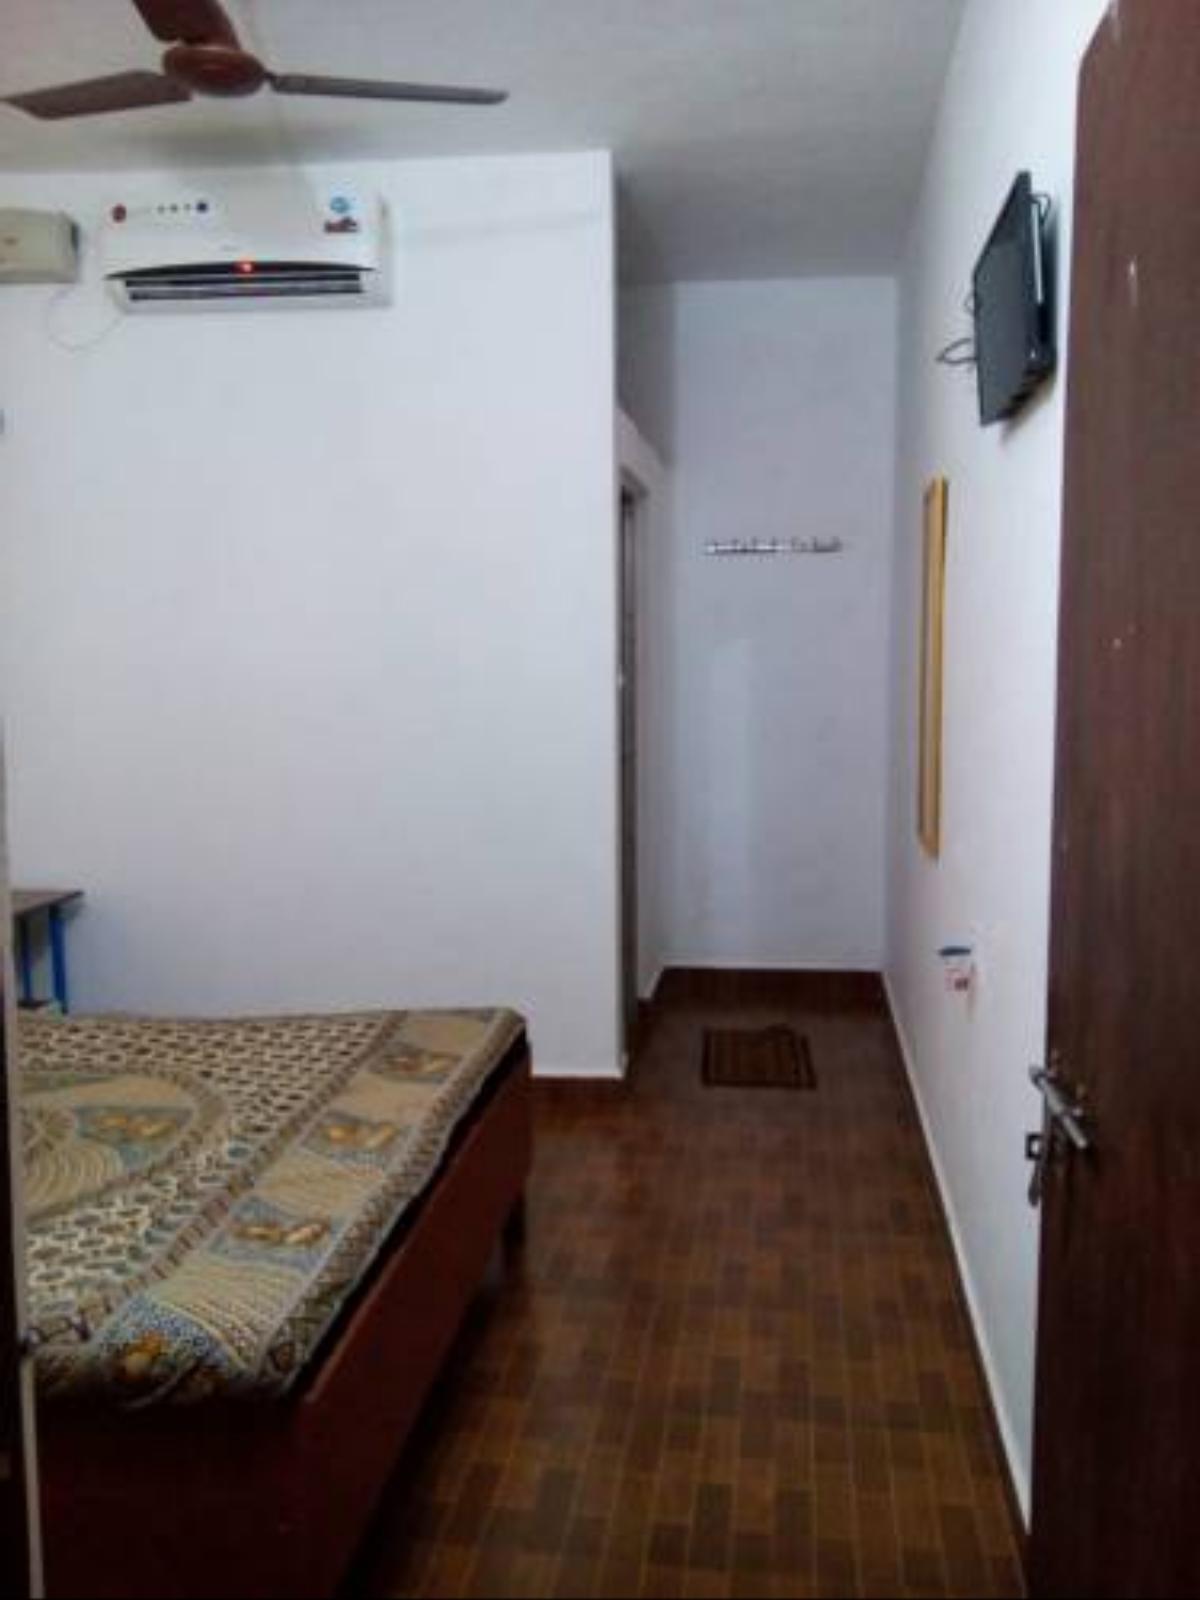 Adilson Guest House Hotel Calangute India